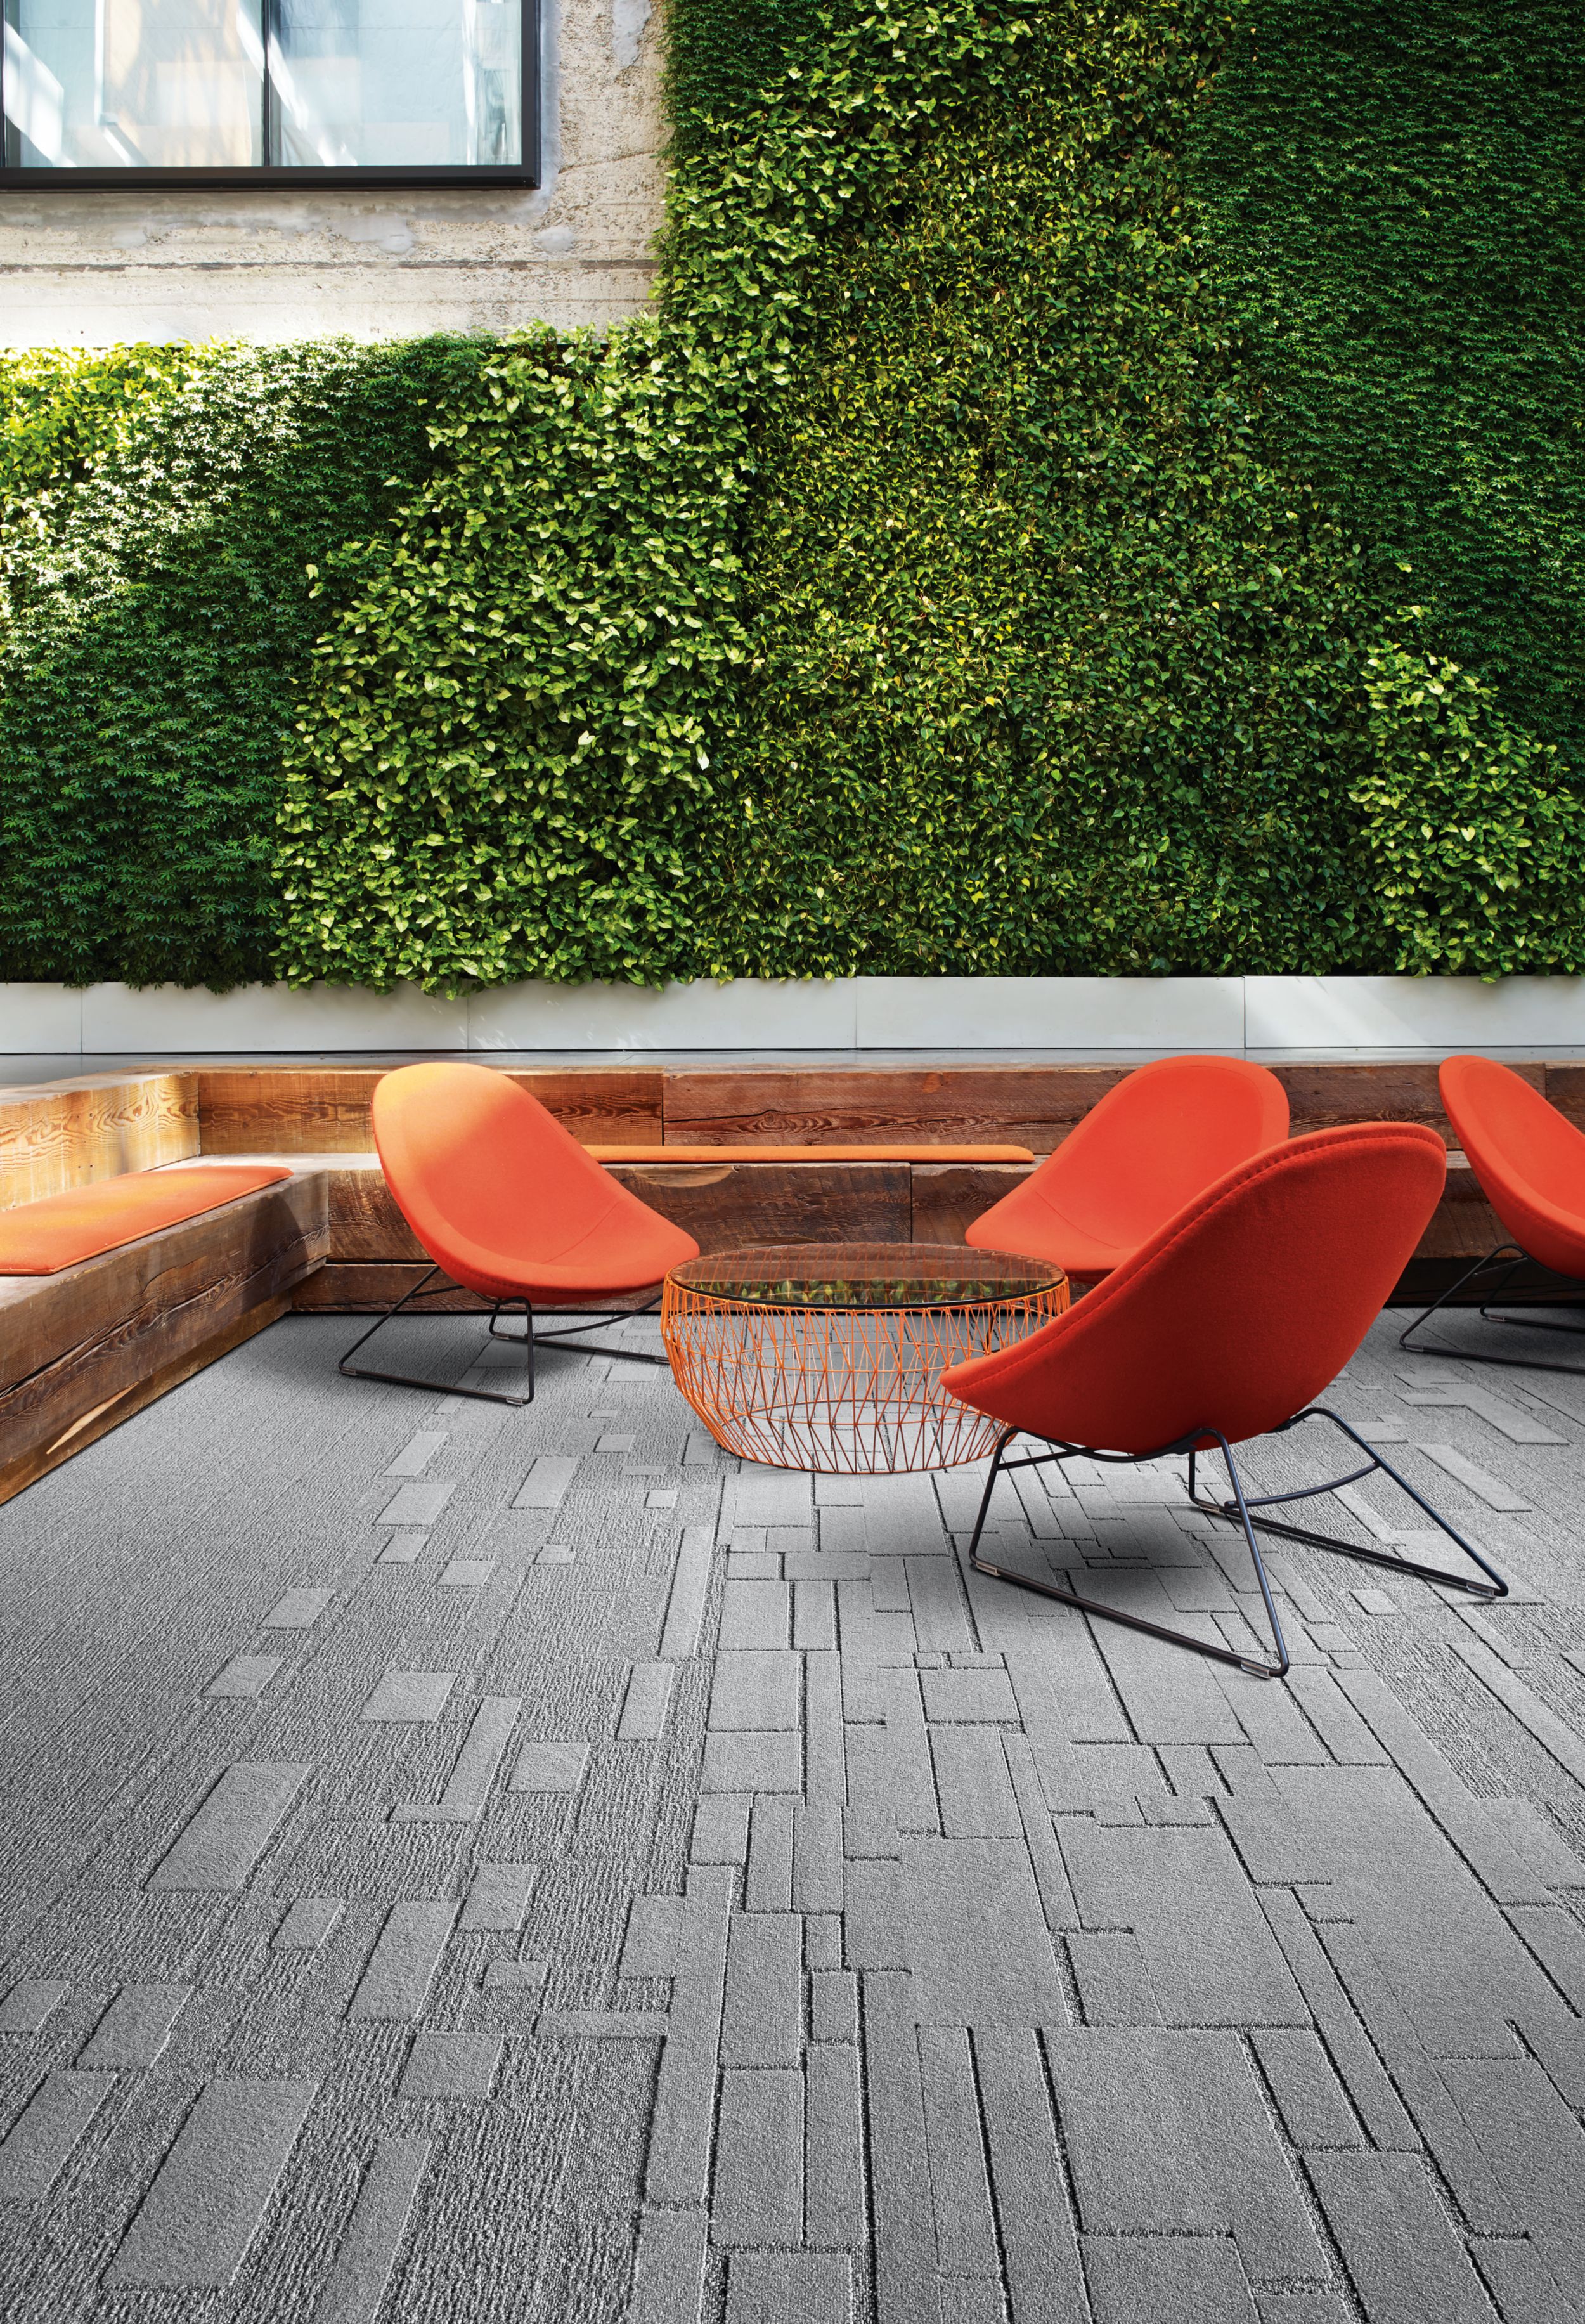 Interface EM551, EM552 and EM553 plank carpet tiles in outdoor green space with orange chairs imagen número 12